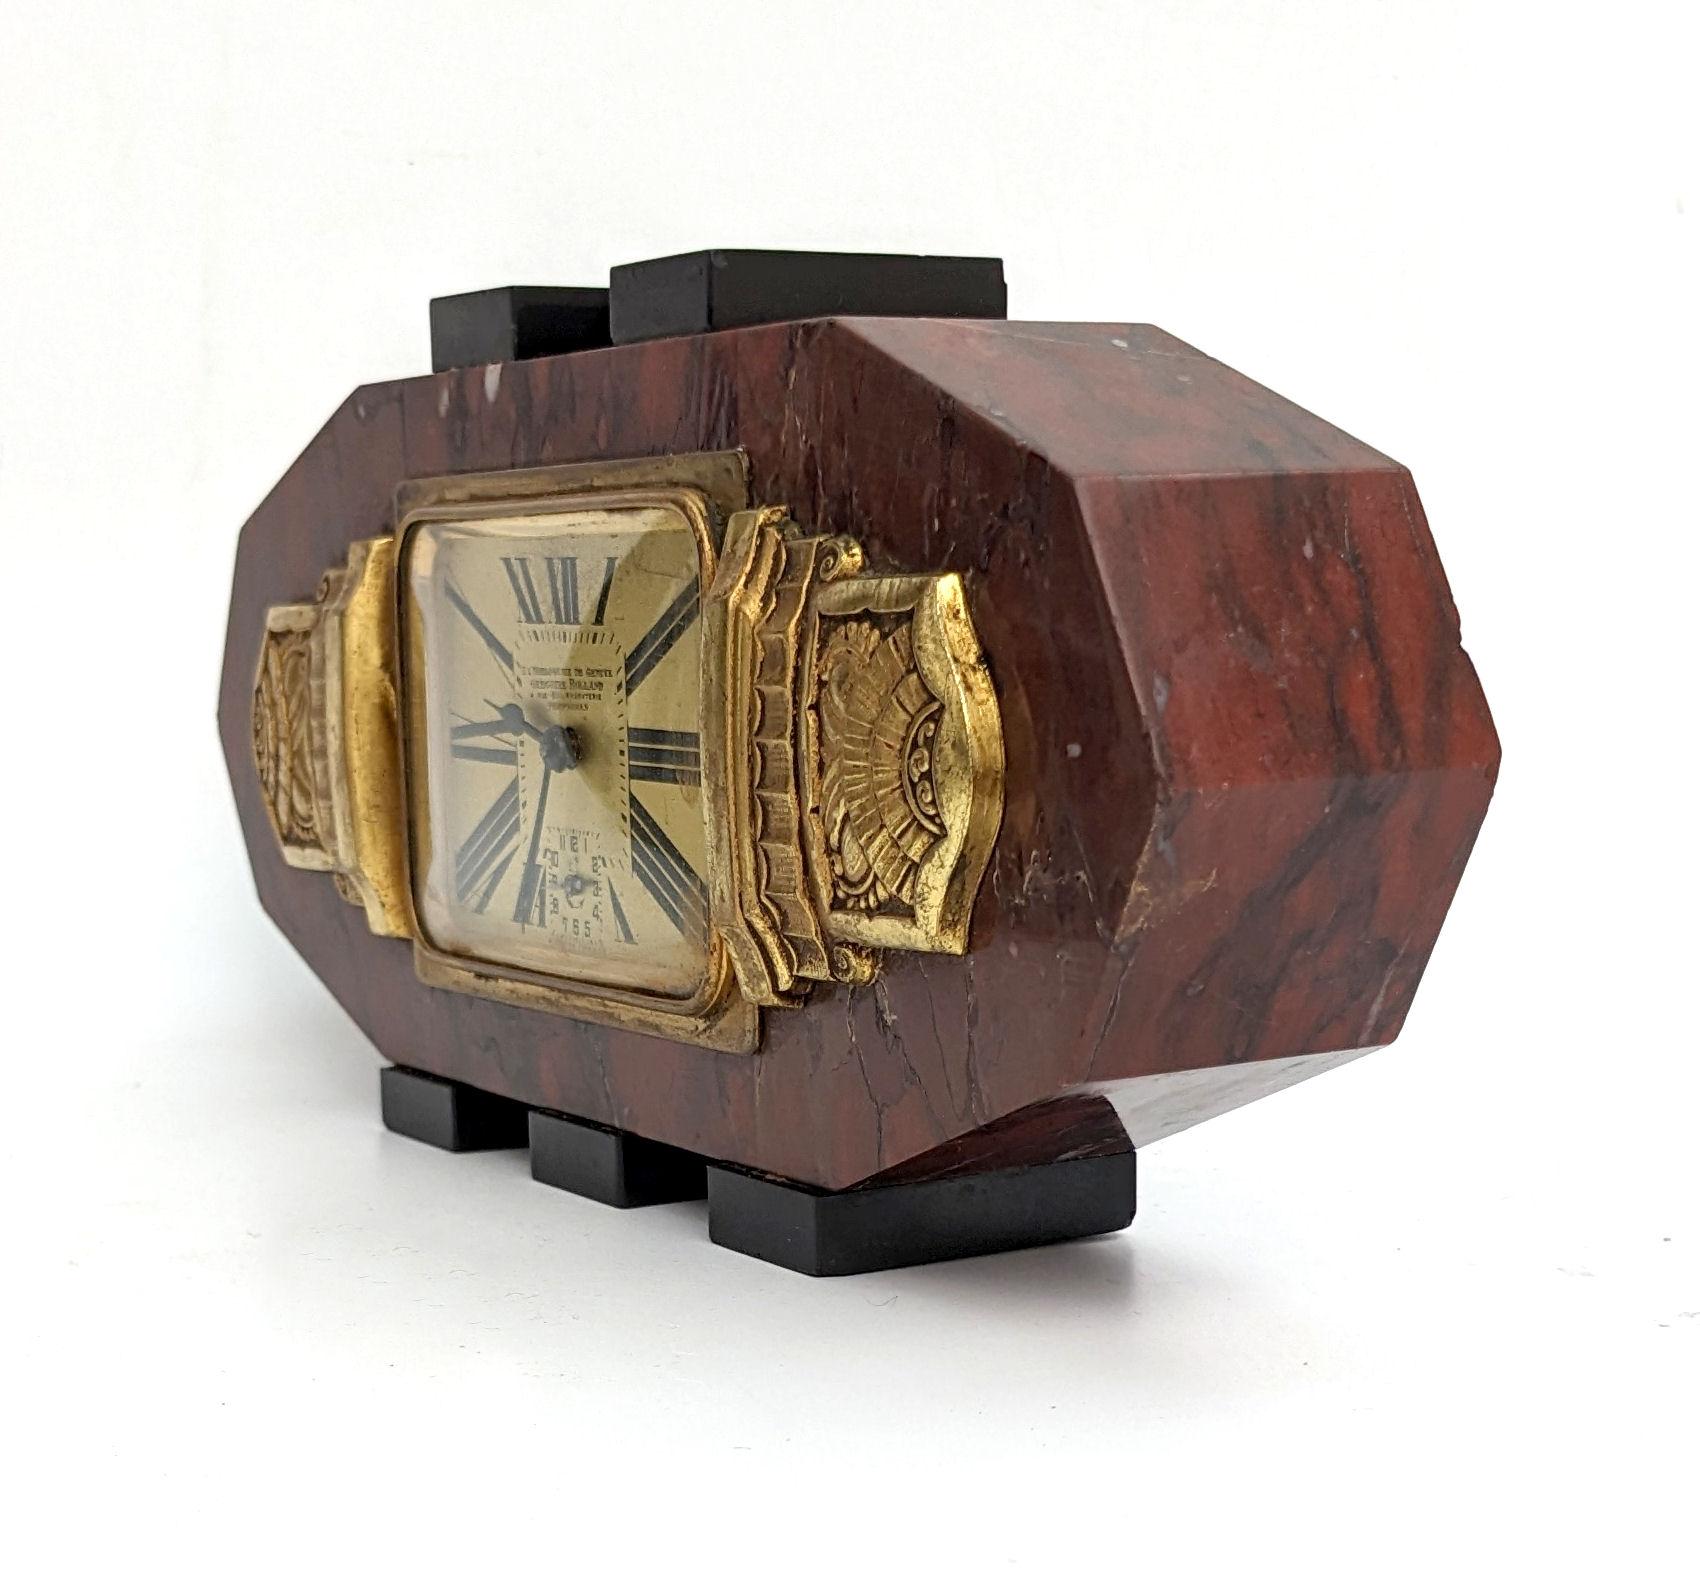 For your consideration is this very visually appealing Art Deco clock. Originates from France and dates to the 1930's this clock ticks all the boxes ( pun intended ) that admirers of this wonderful style seek and so sure not to disappoint. Perfect